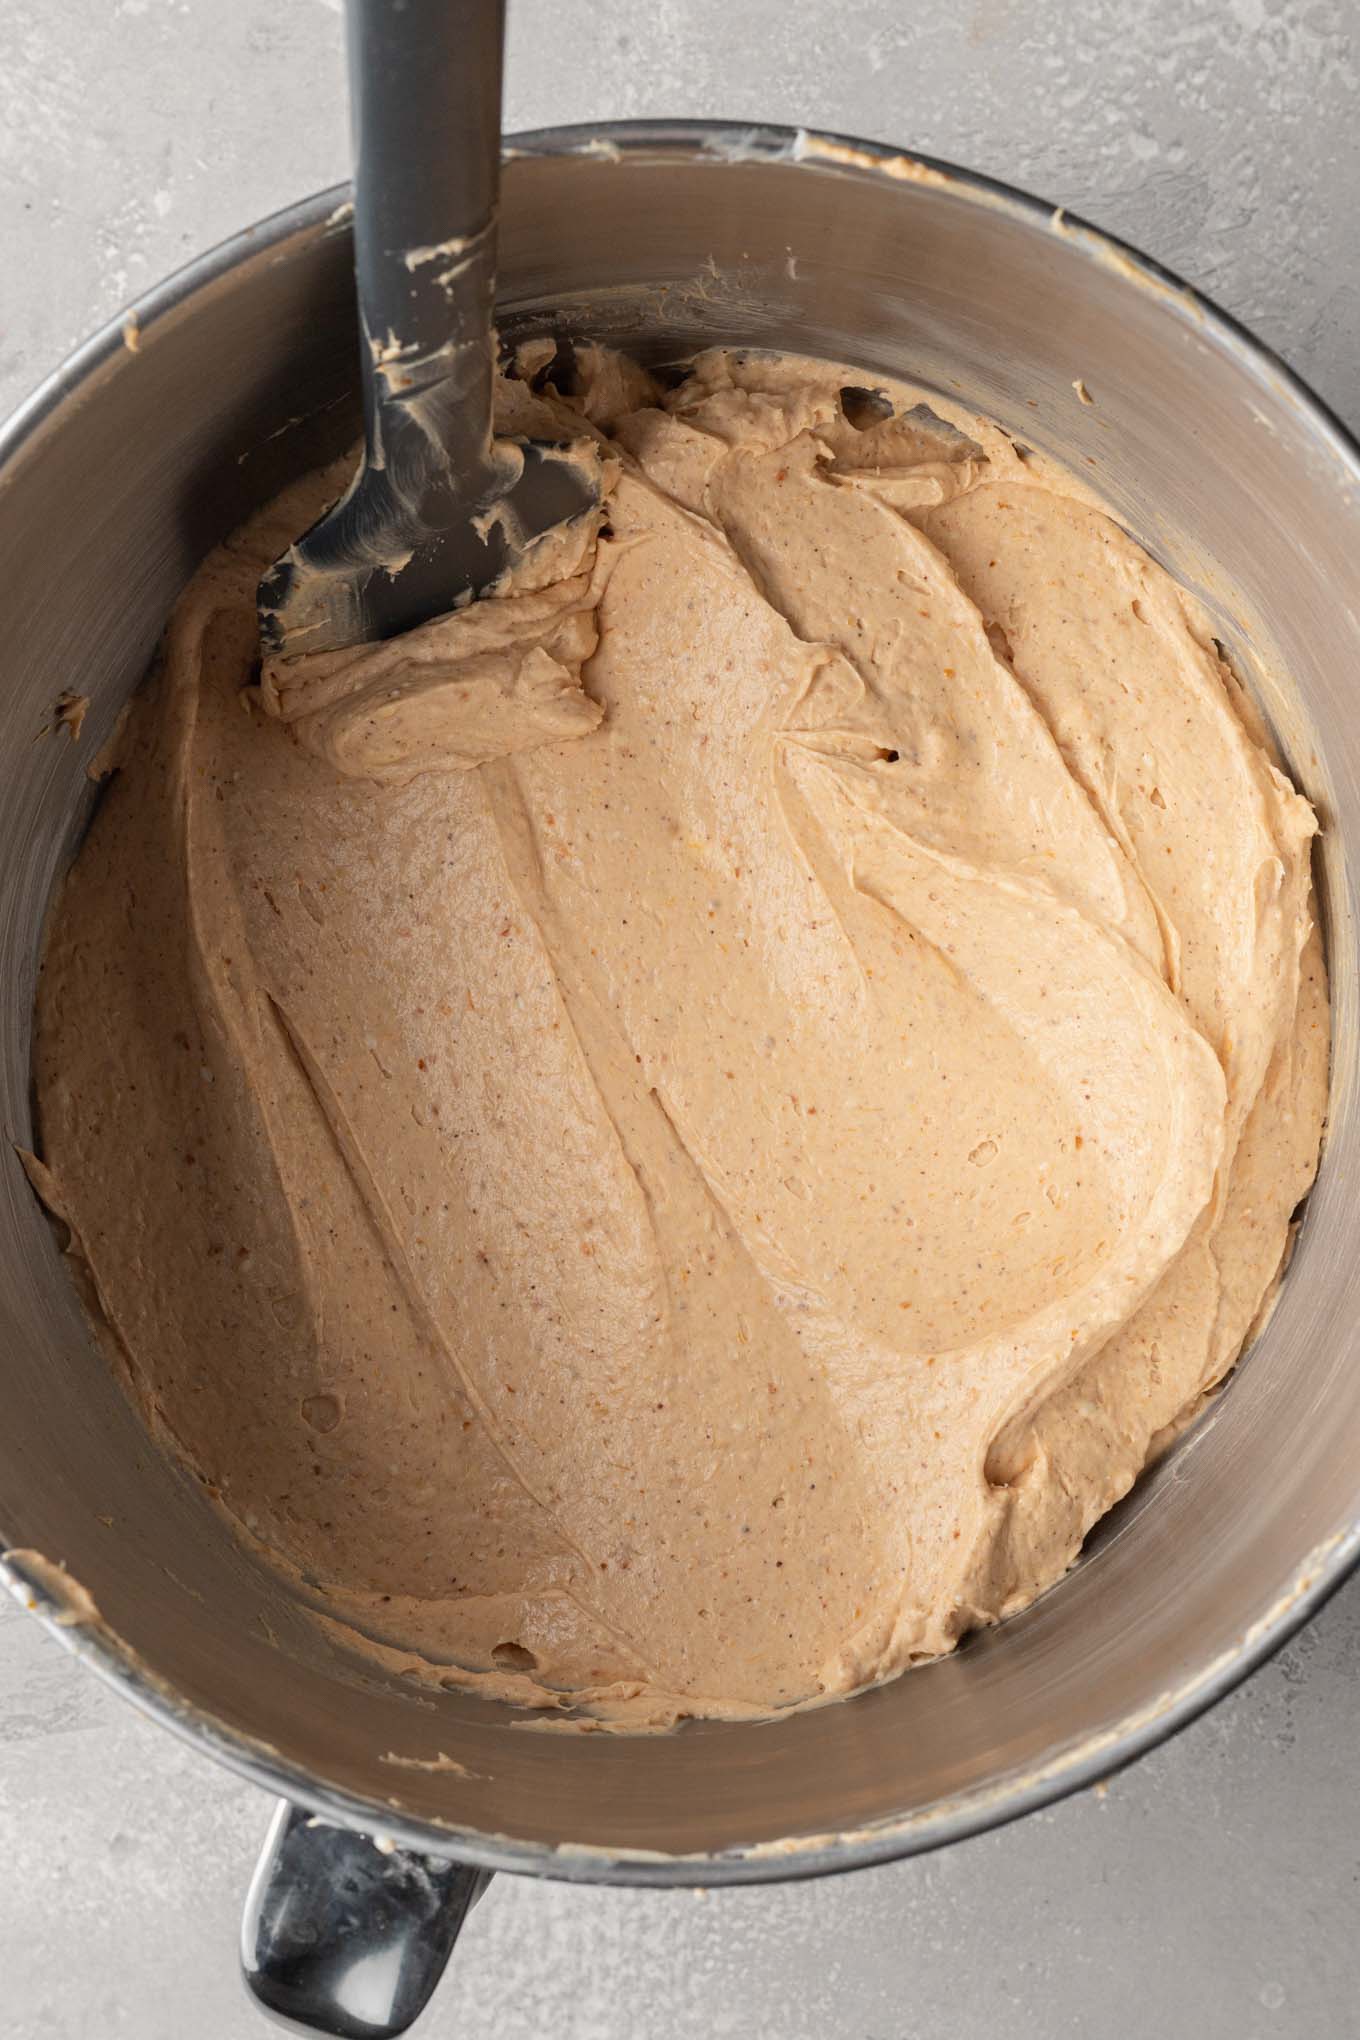 An overhead view of no bake pumpkin cheesecake filling in the bowl of a stand mixer.